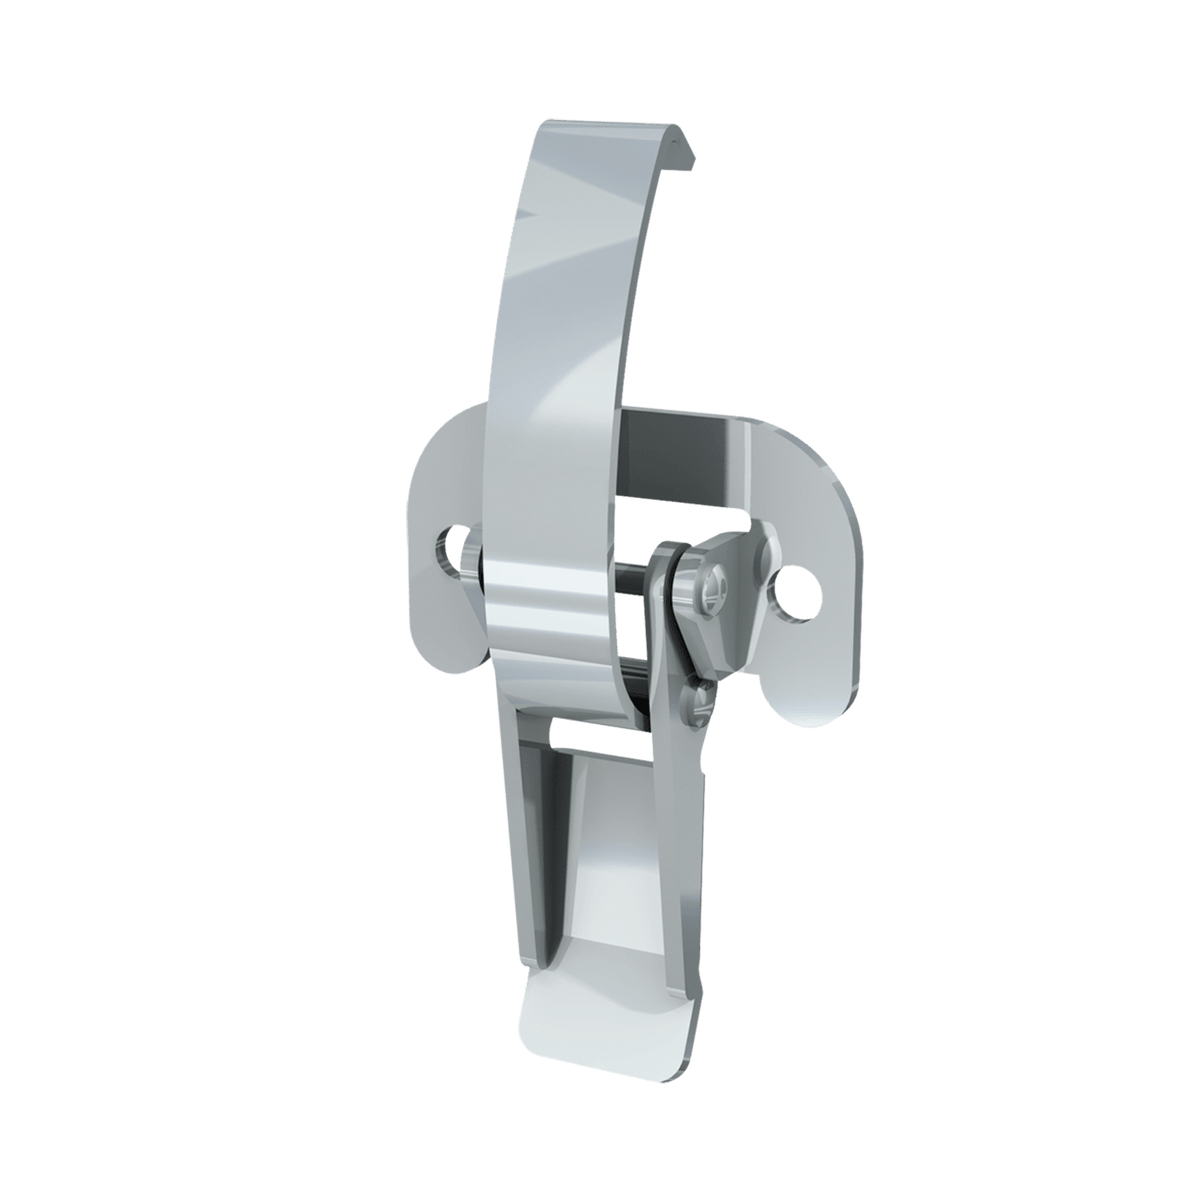 Render of Lever Operated Drawlatch (with flat mounting plate)